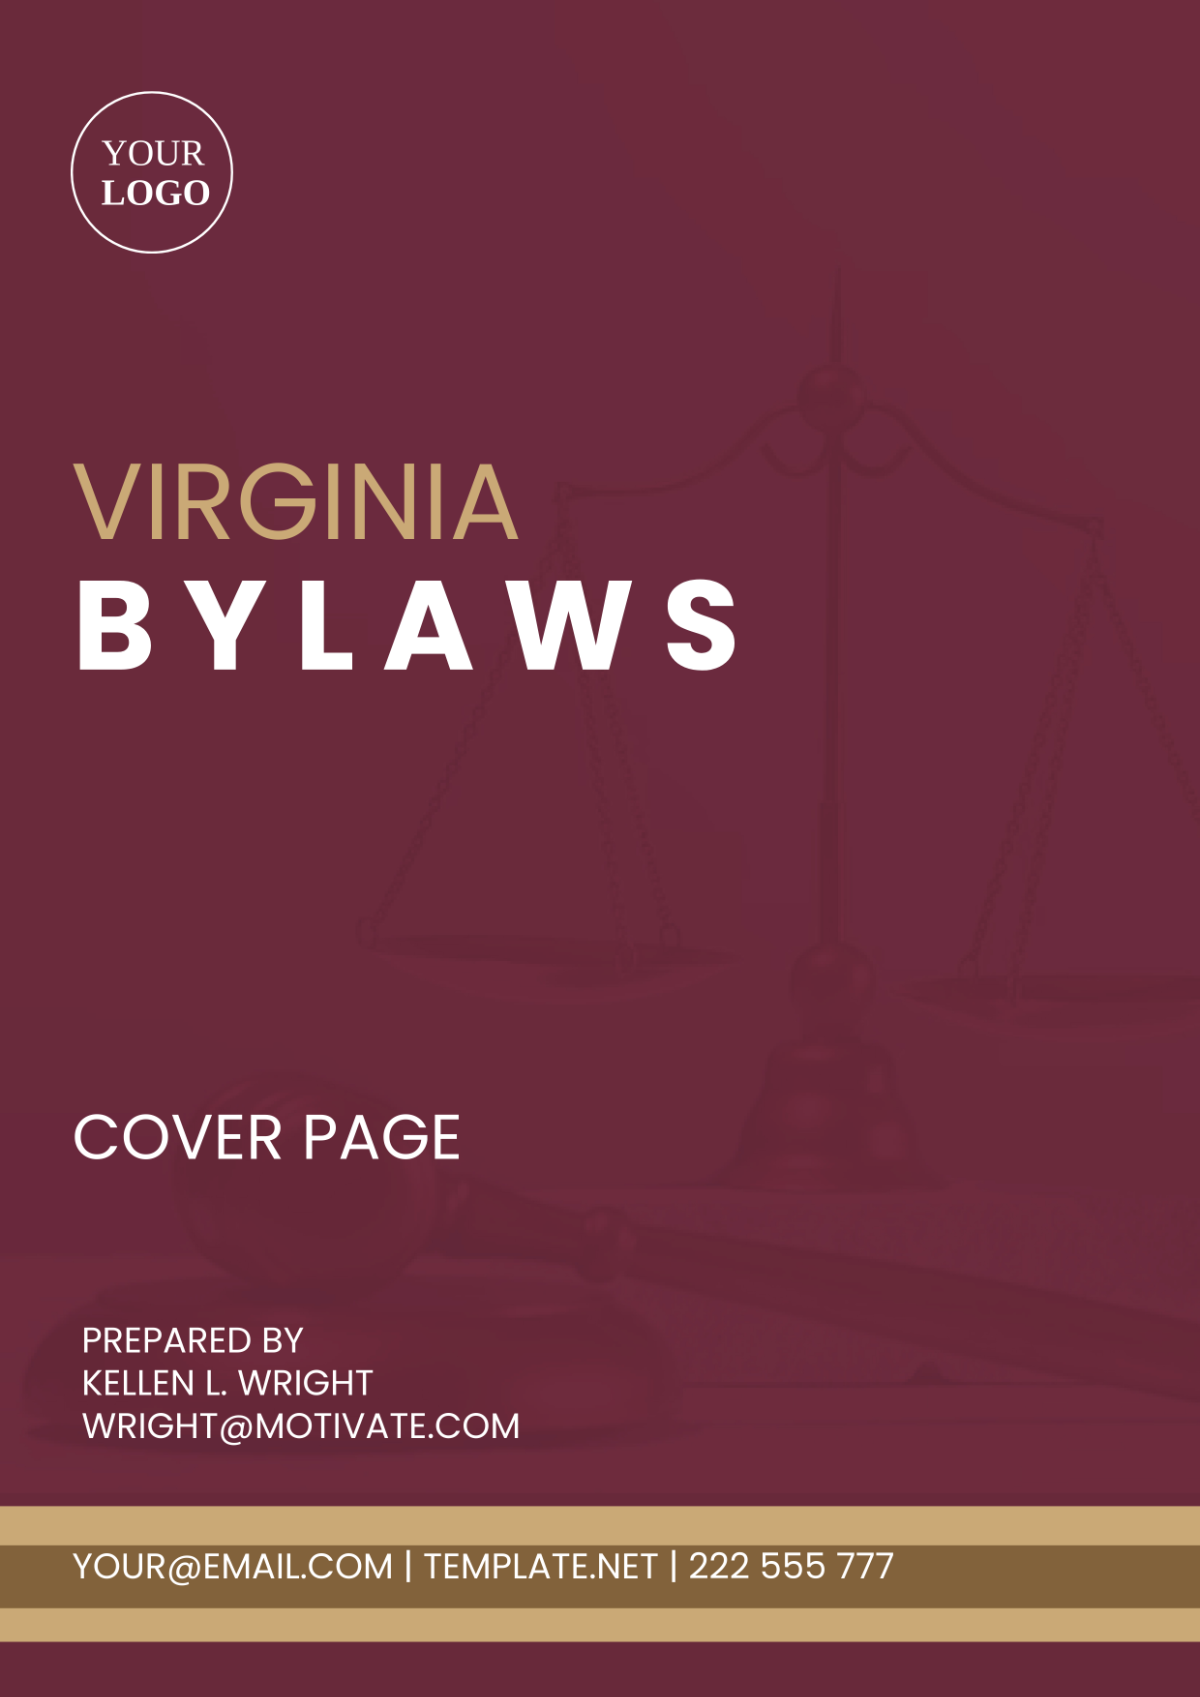 Virginia Bylaws Cover Page Template